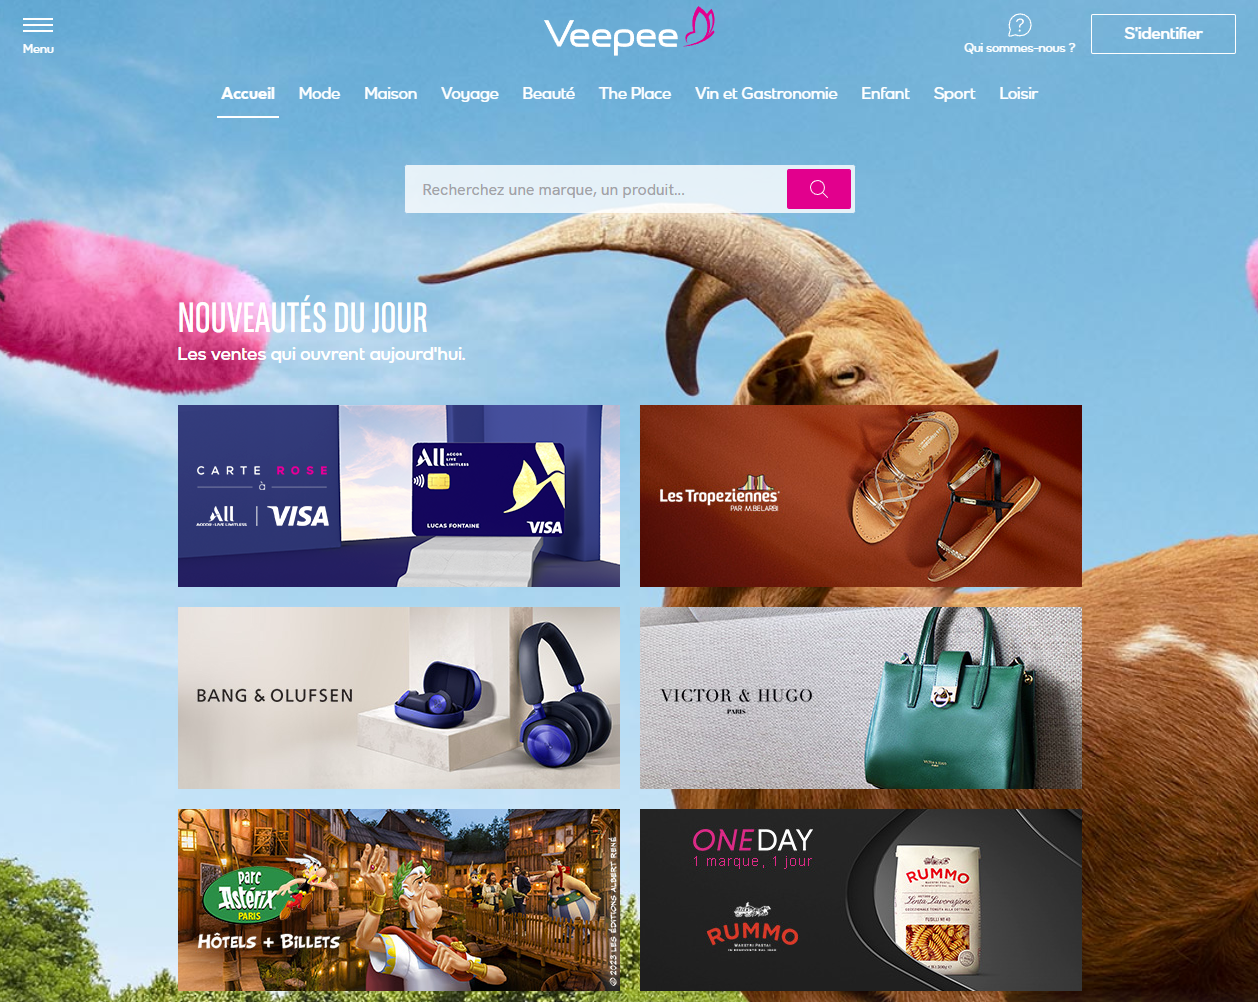 eCommerce companies in France